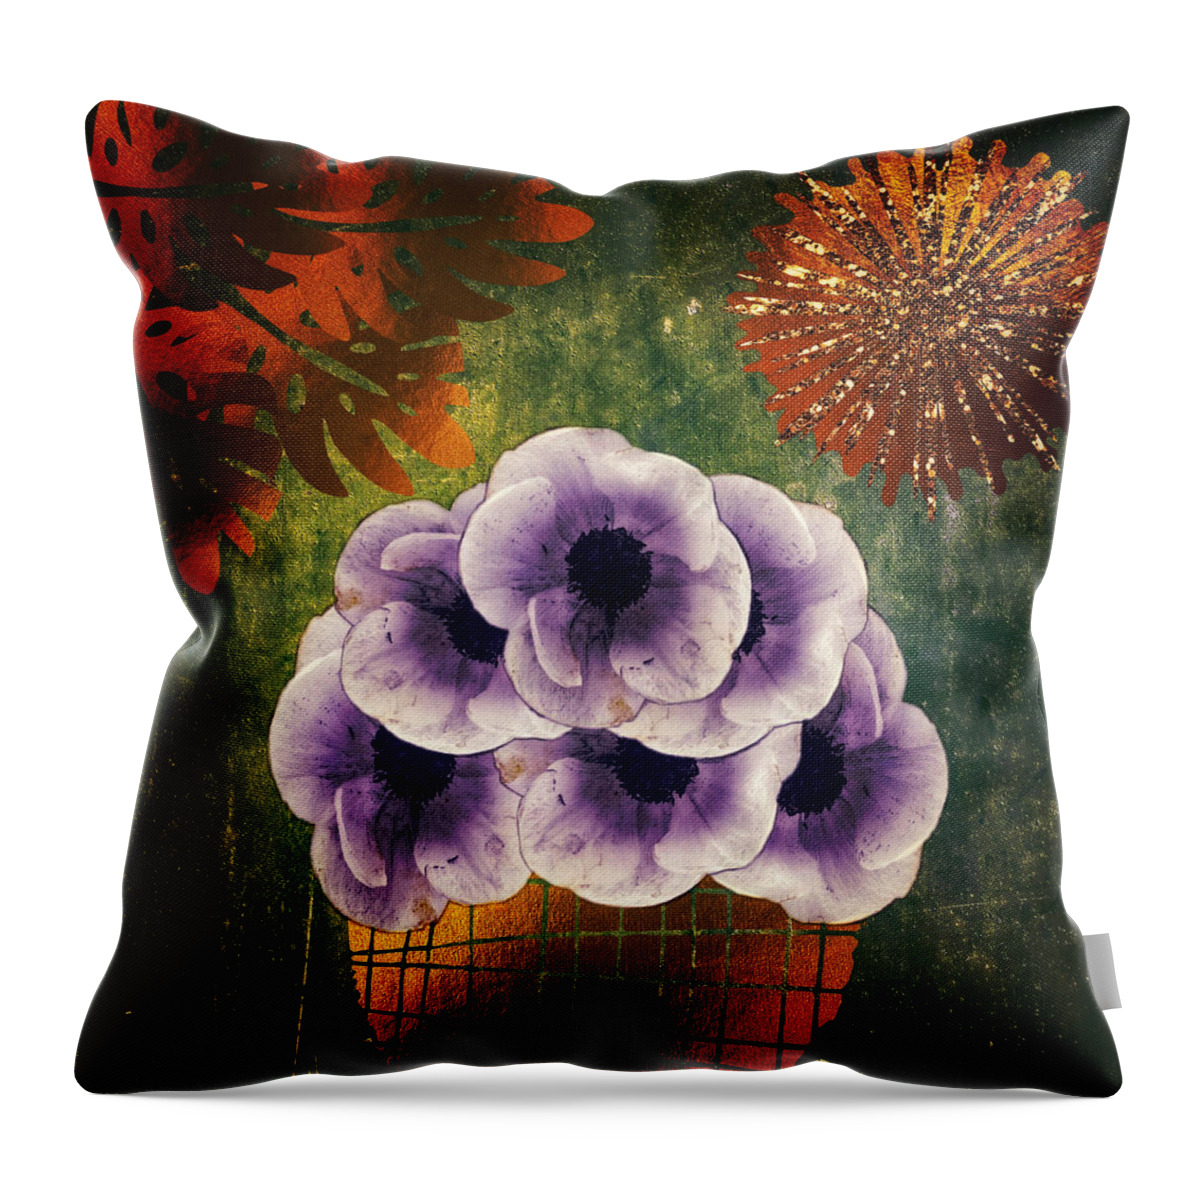 Abstract Art Throw Pillow featuring the digital art African Violet by Canessa Thomas